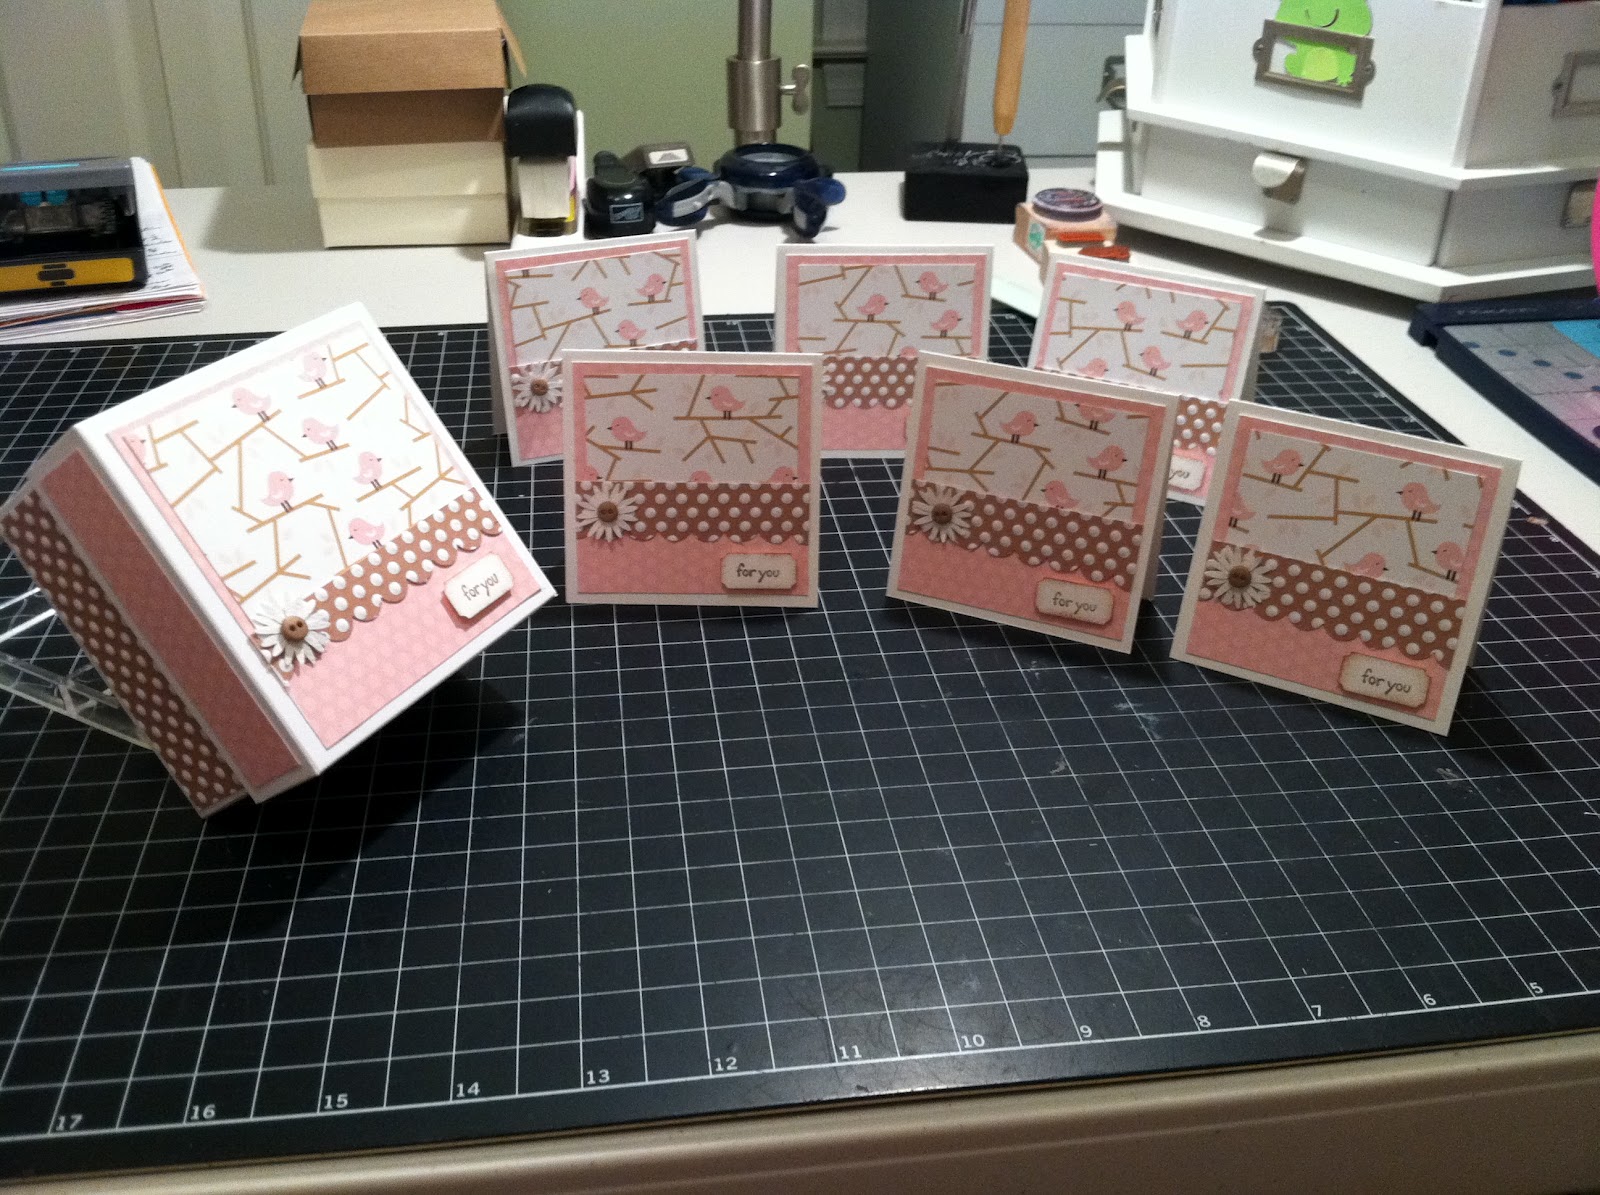 Casey's Cards & Crafts: 3x3 Gift Card Set with Matching Envelope & Box